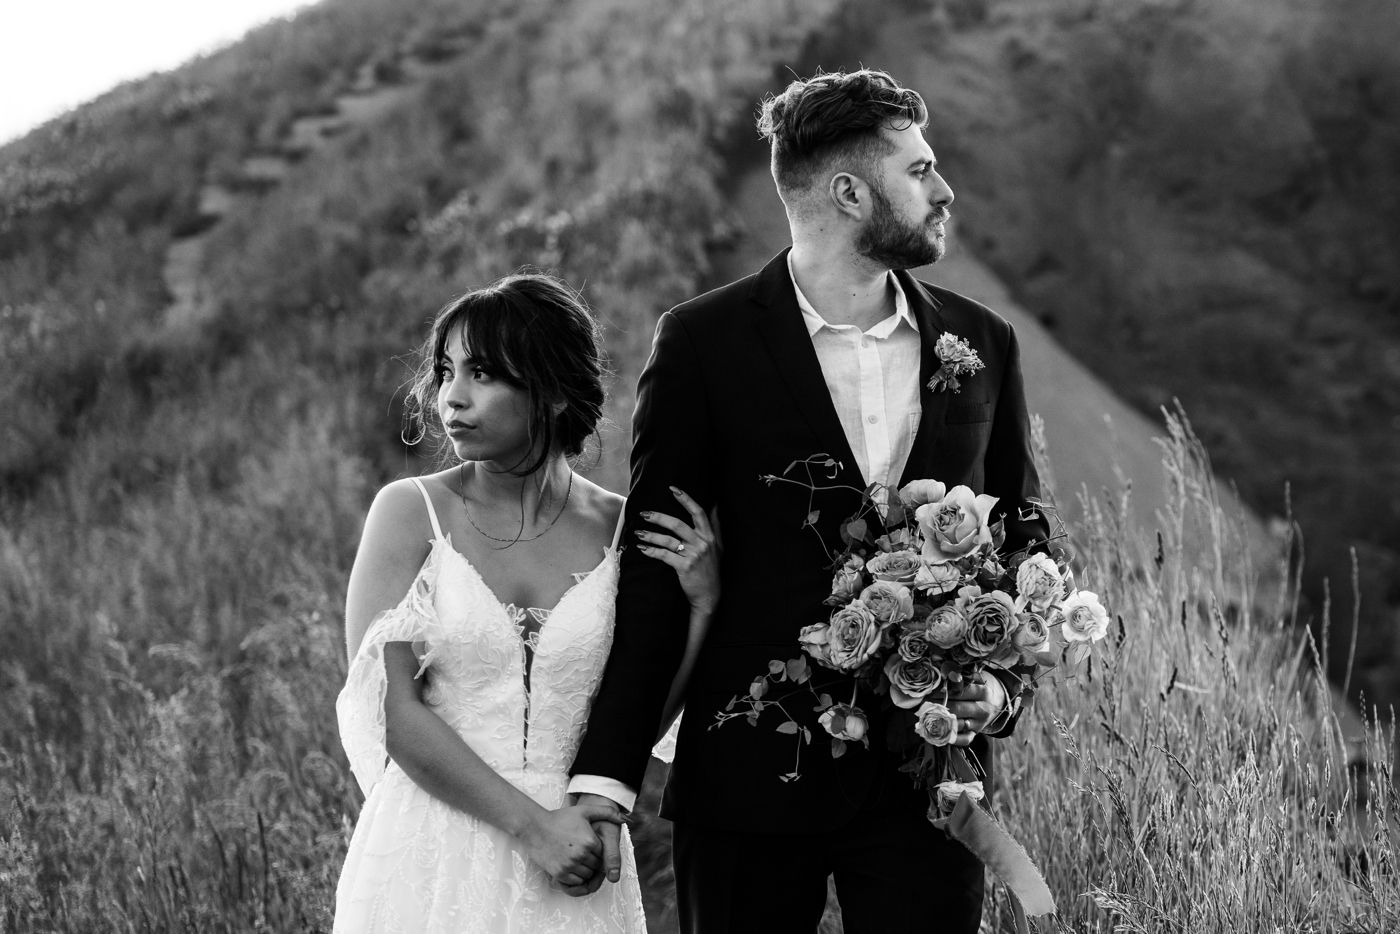 Black and white portrait of a bride and groom, groom holding the bouquet